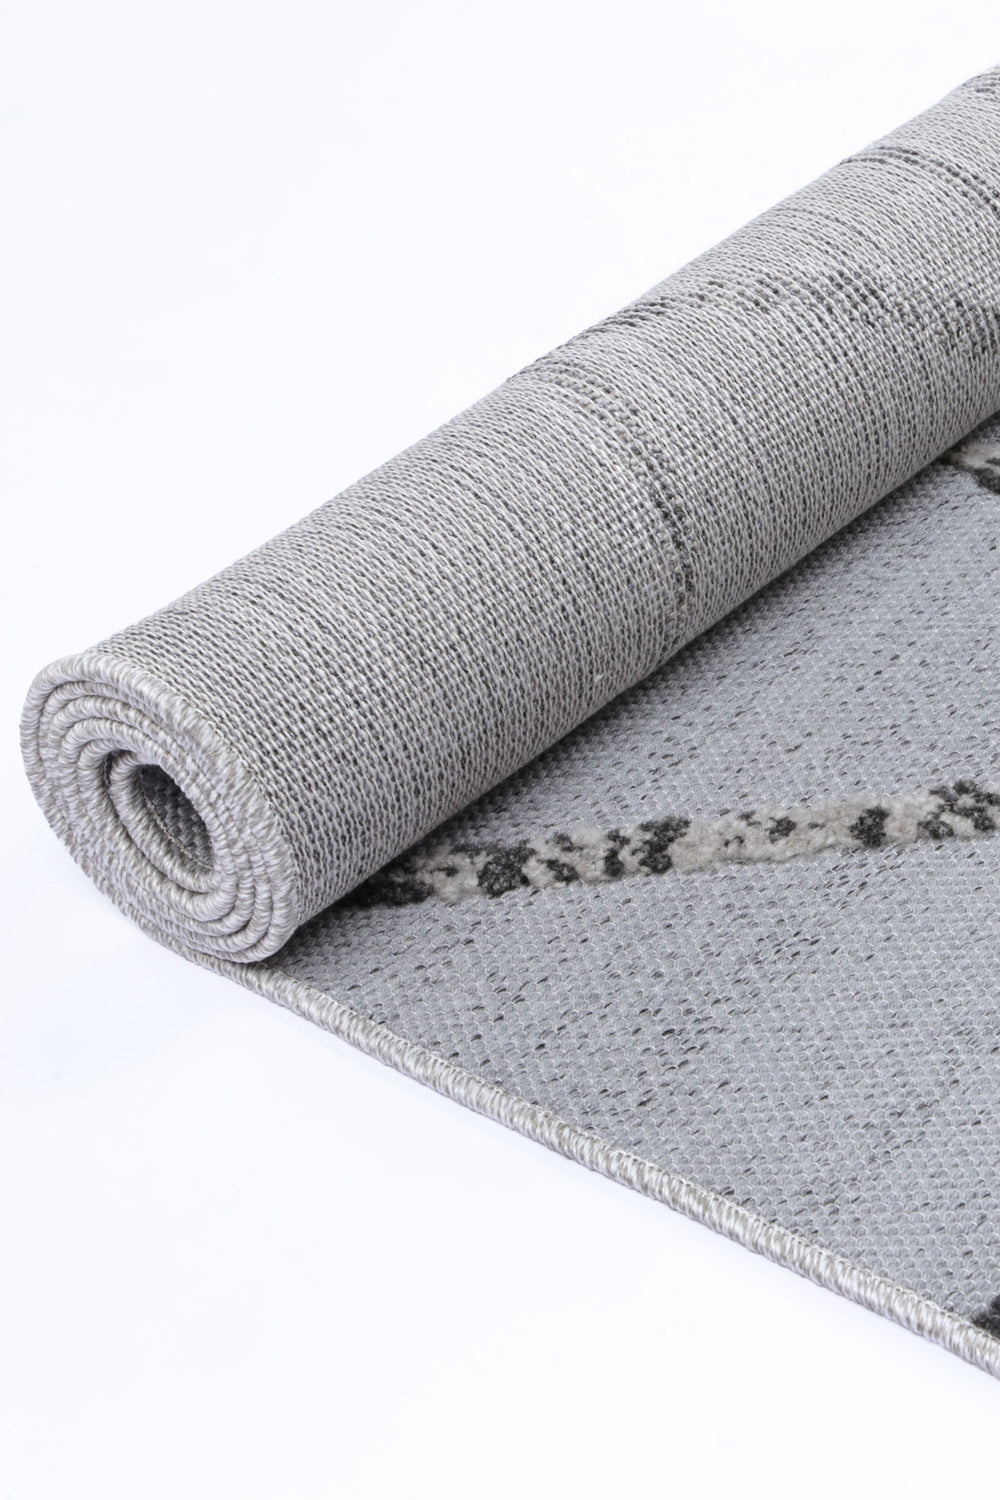 Ares Sparta Geomteric Grey and Ash Rug